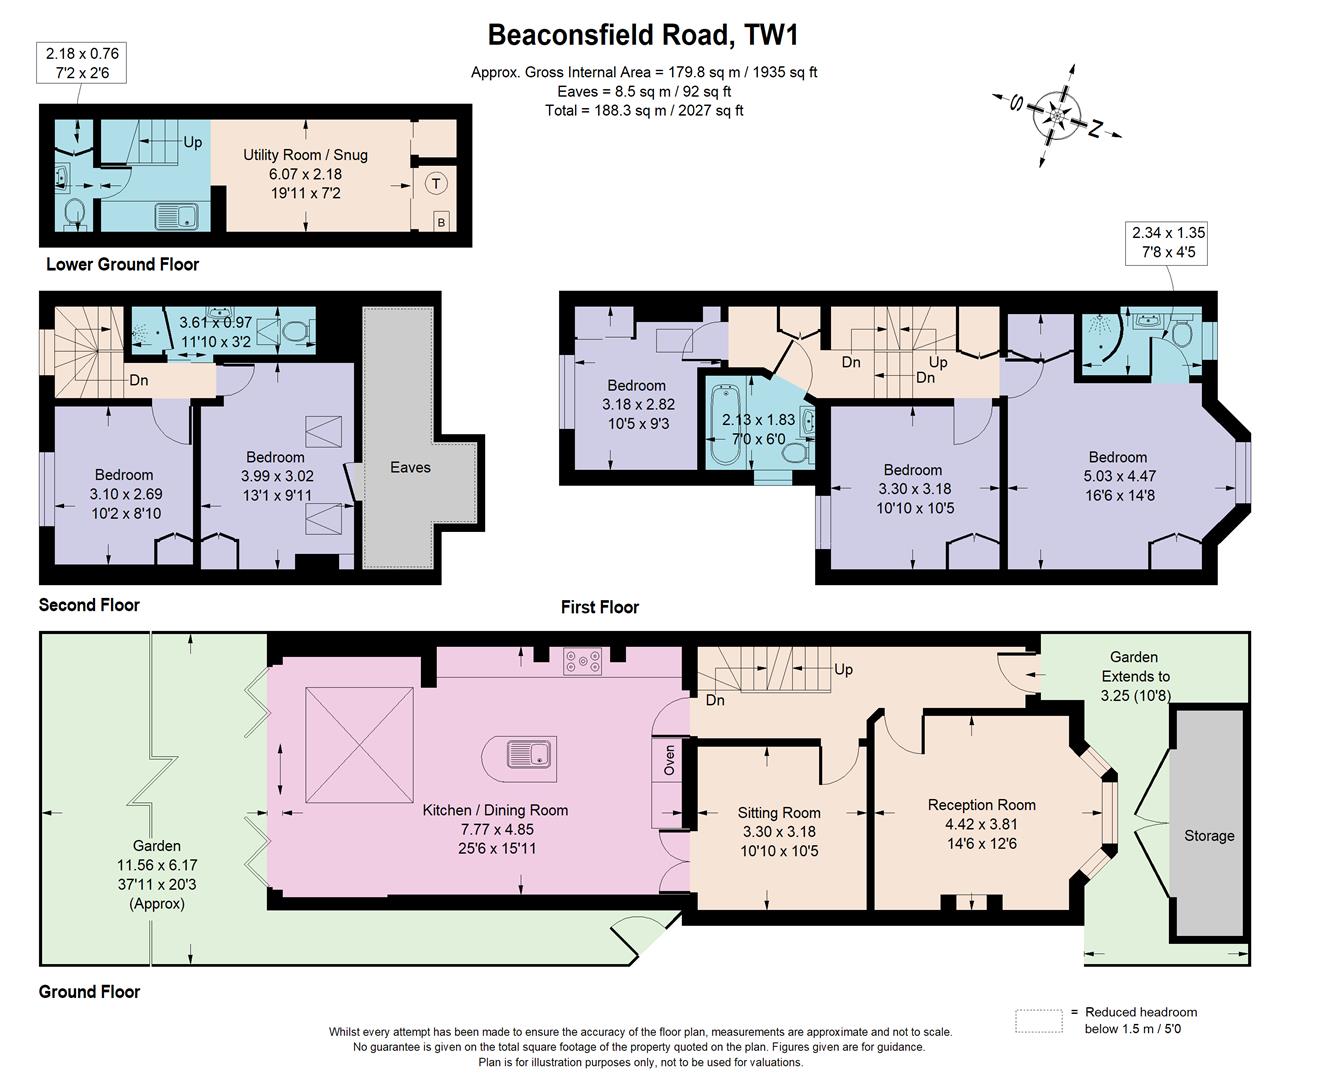 5 Bedrooms Semi-detached house for sale in Beaconsfield Road, St Margarets, Twickenham TW1